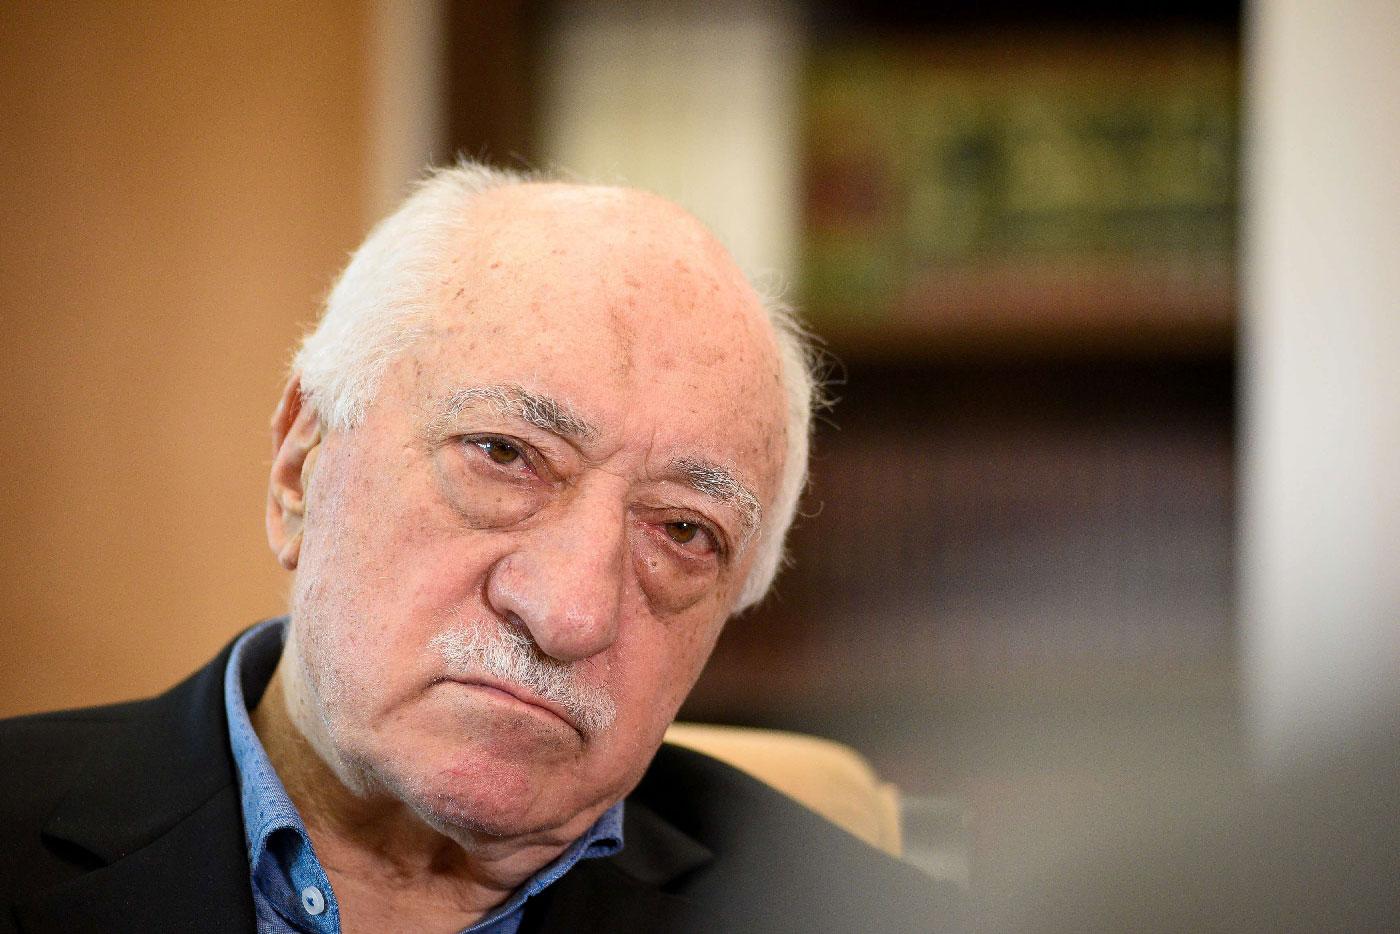 US based Turkish cleric Fethullah Gulen at his home in Saylorsburg, Pennsylvania, on July 10, 2017.